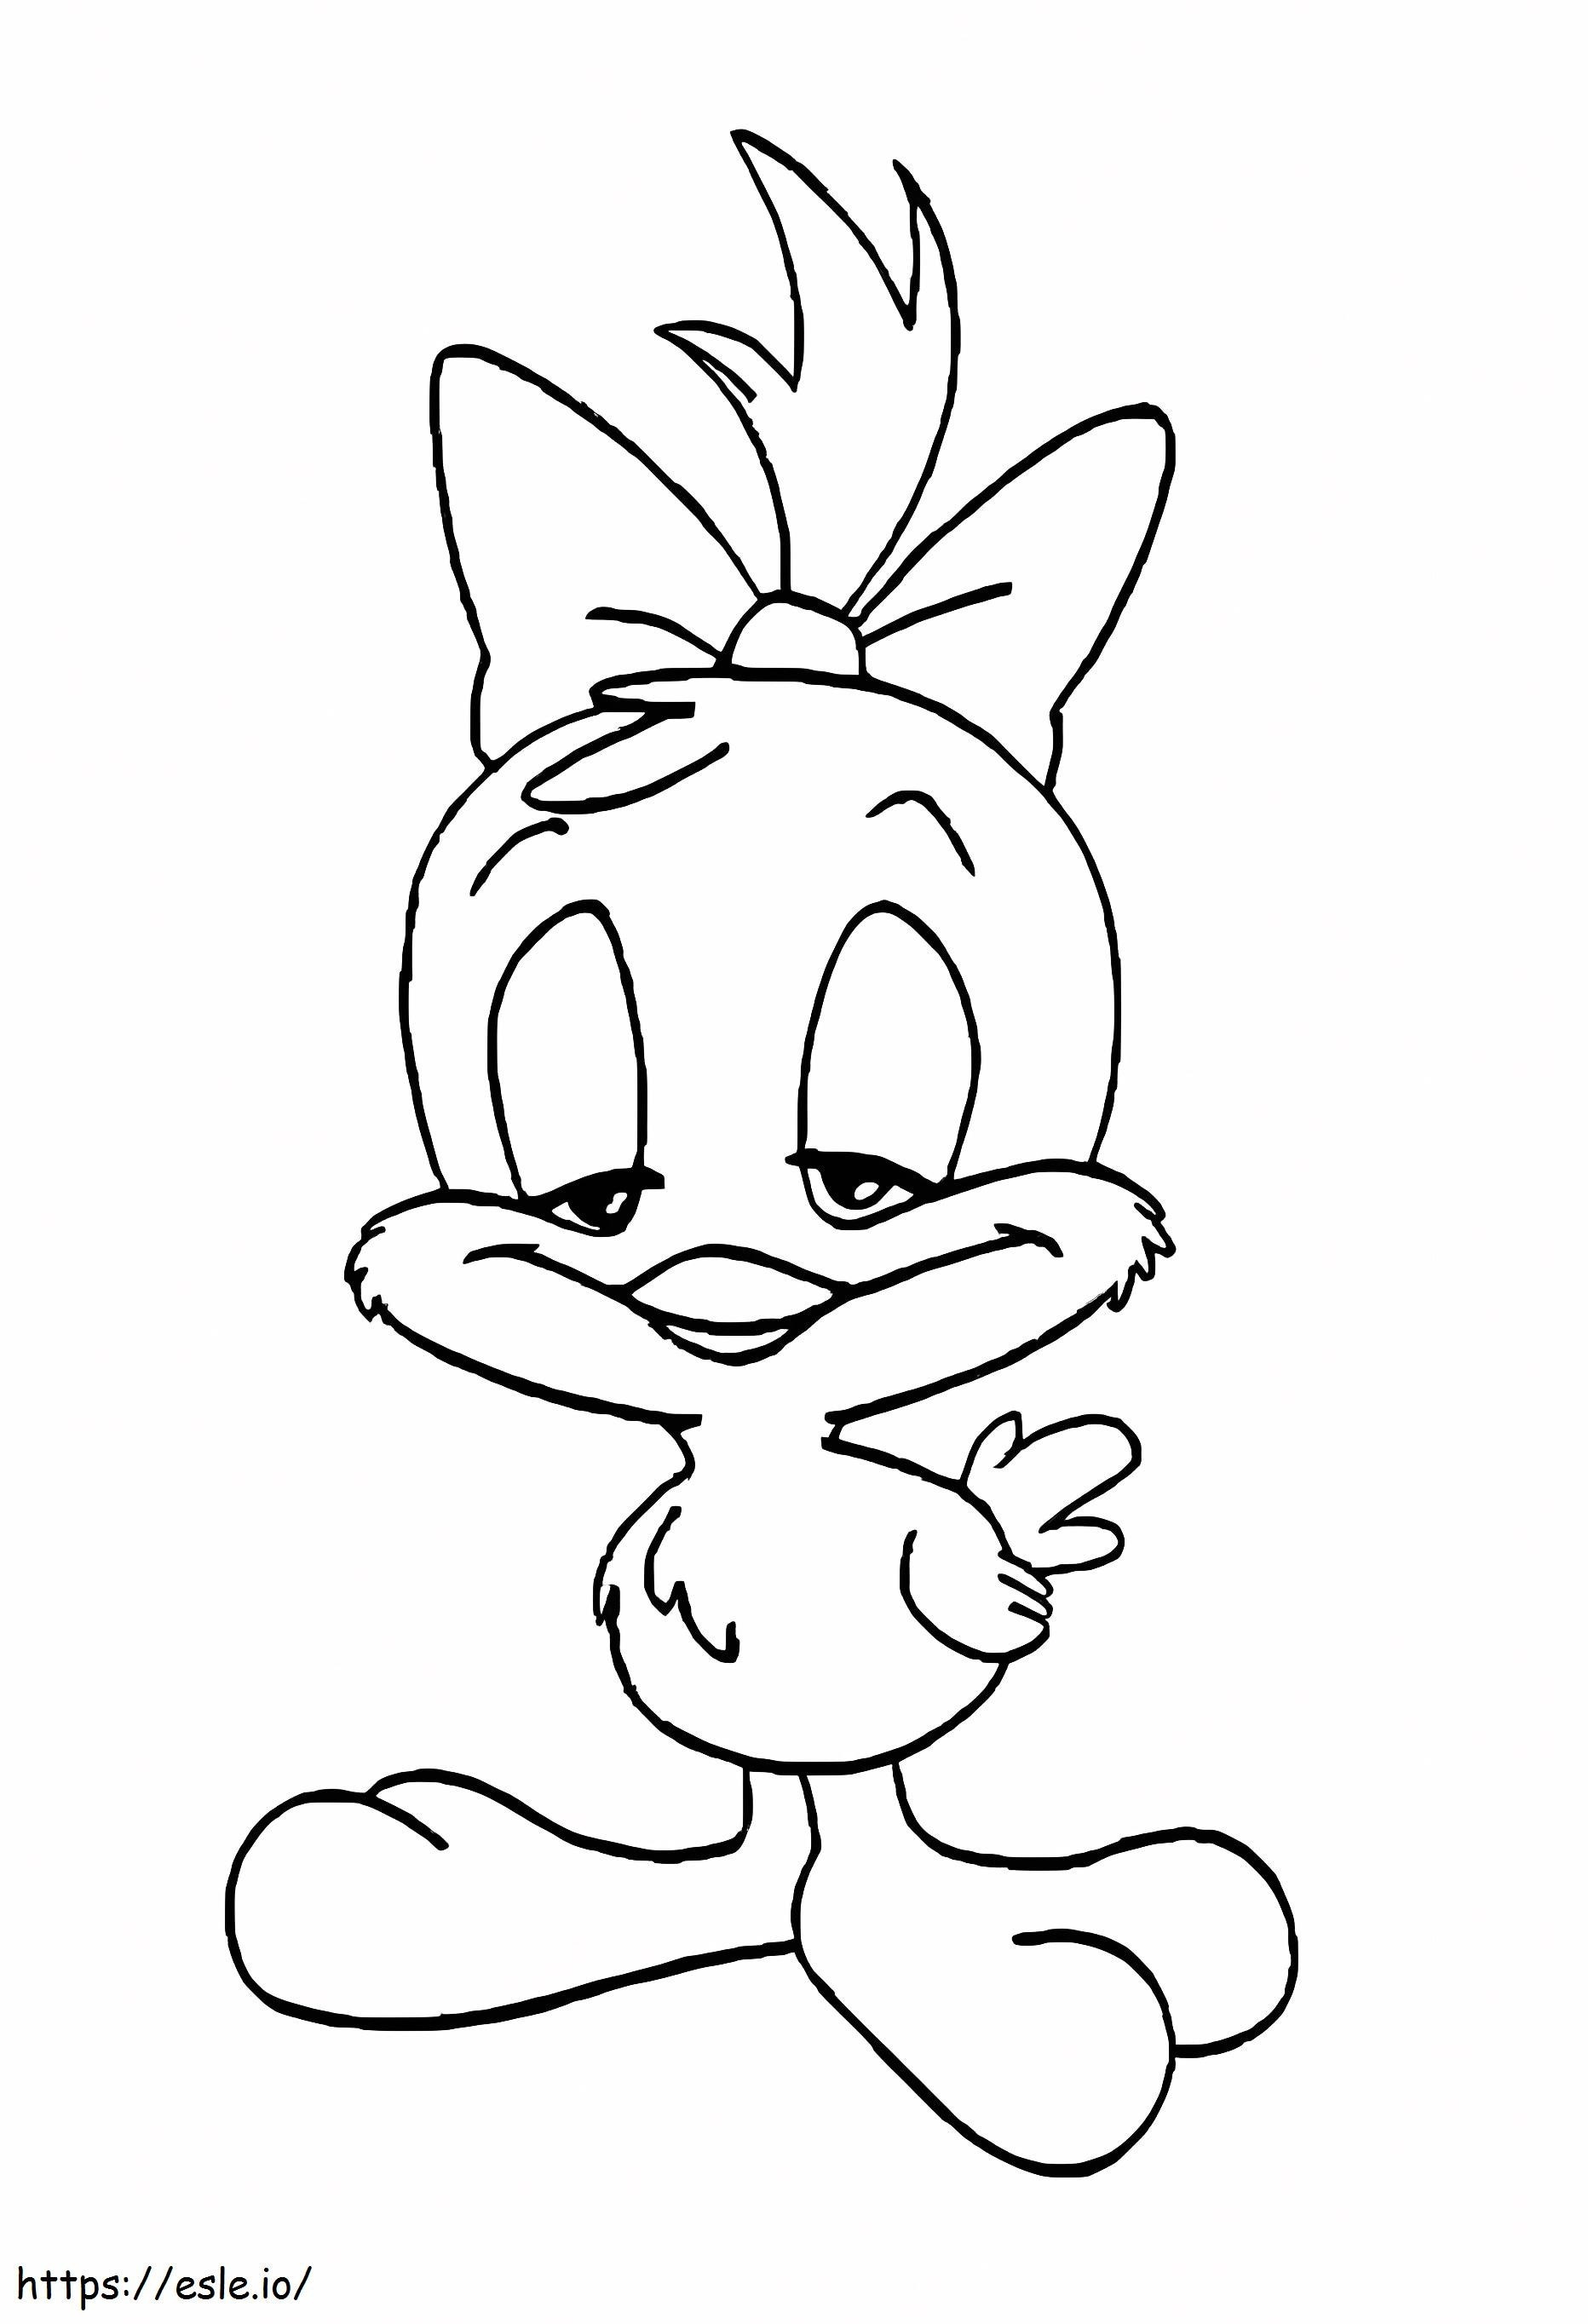 Sweetie Bird Tiny Toon coloring page